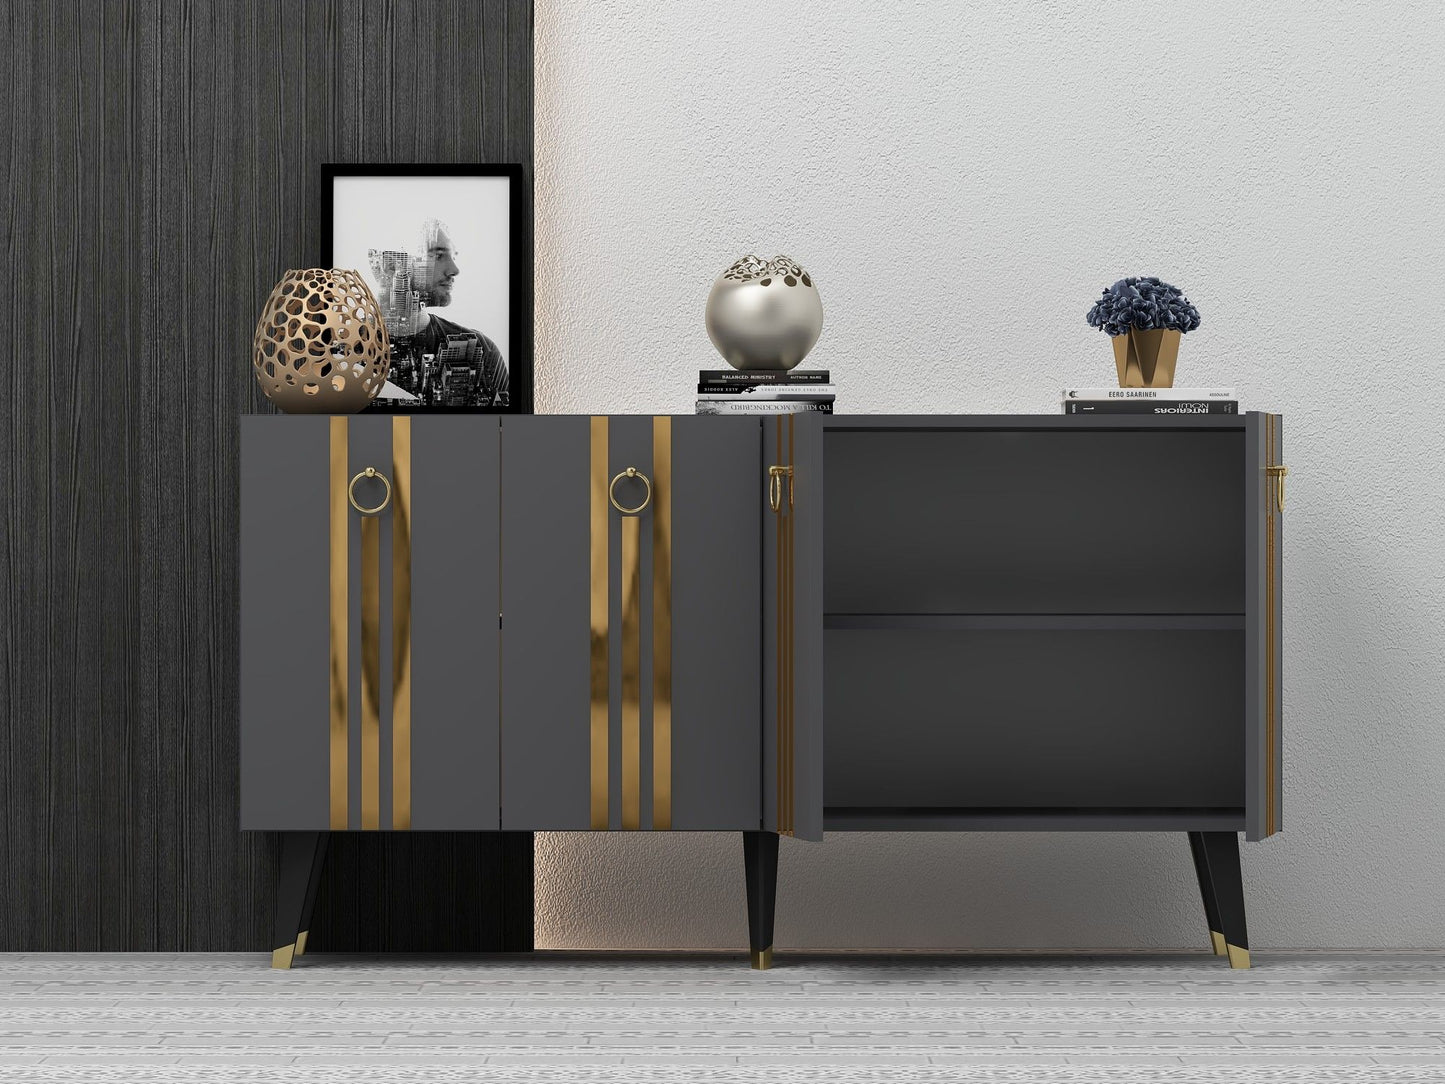 Isil v2 - Anthracite, Gold - Console